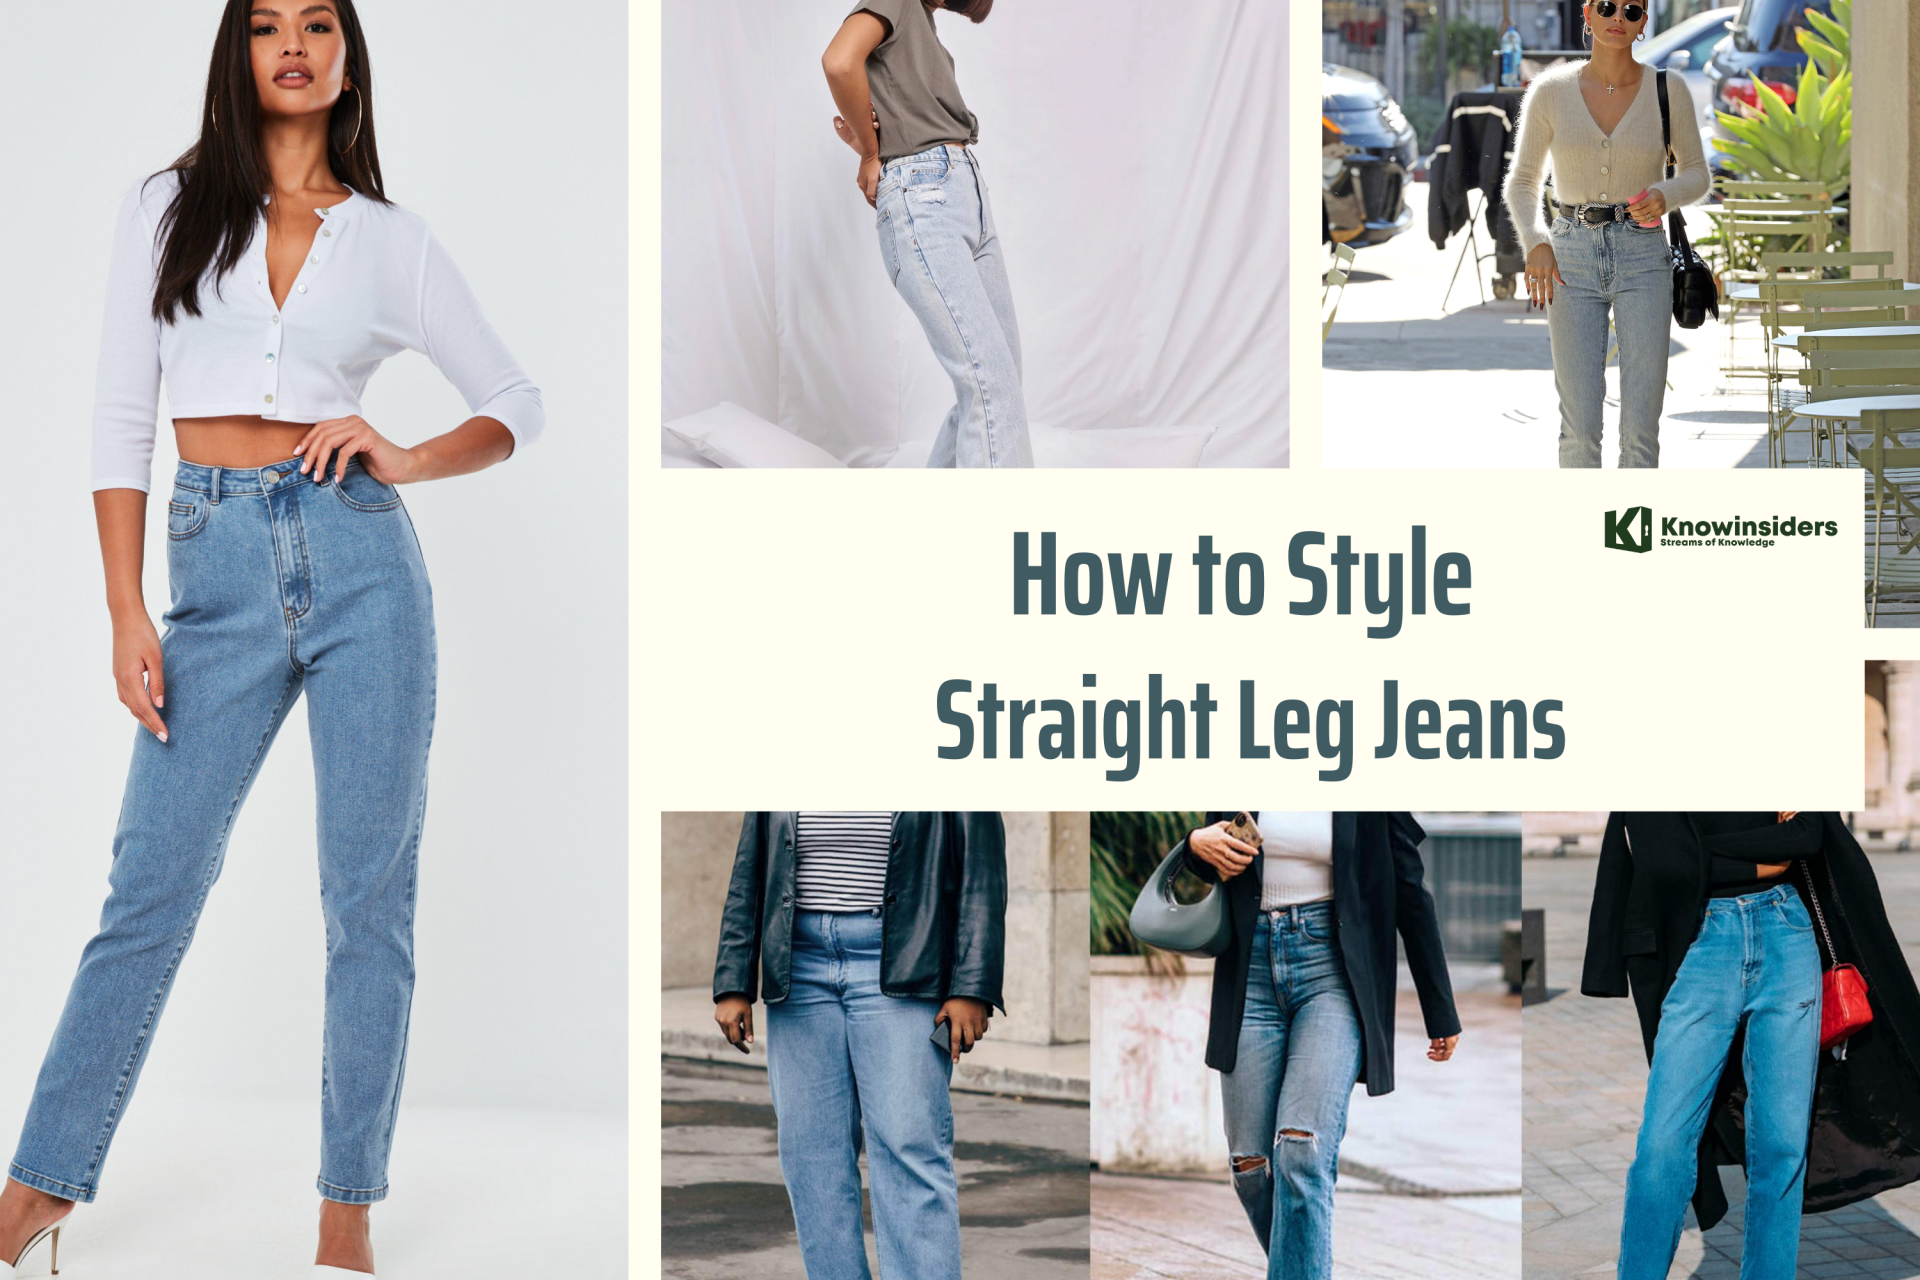 How To Style Straight Leg Jeans in 2022 with Hottest Trends